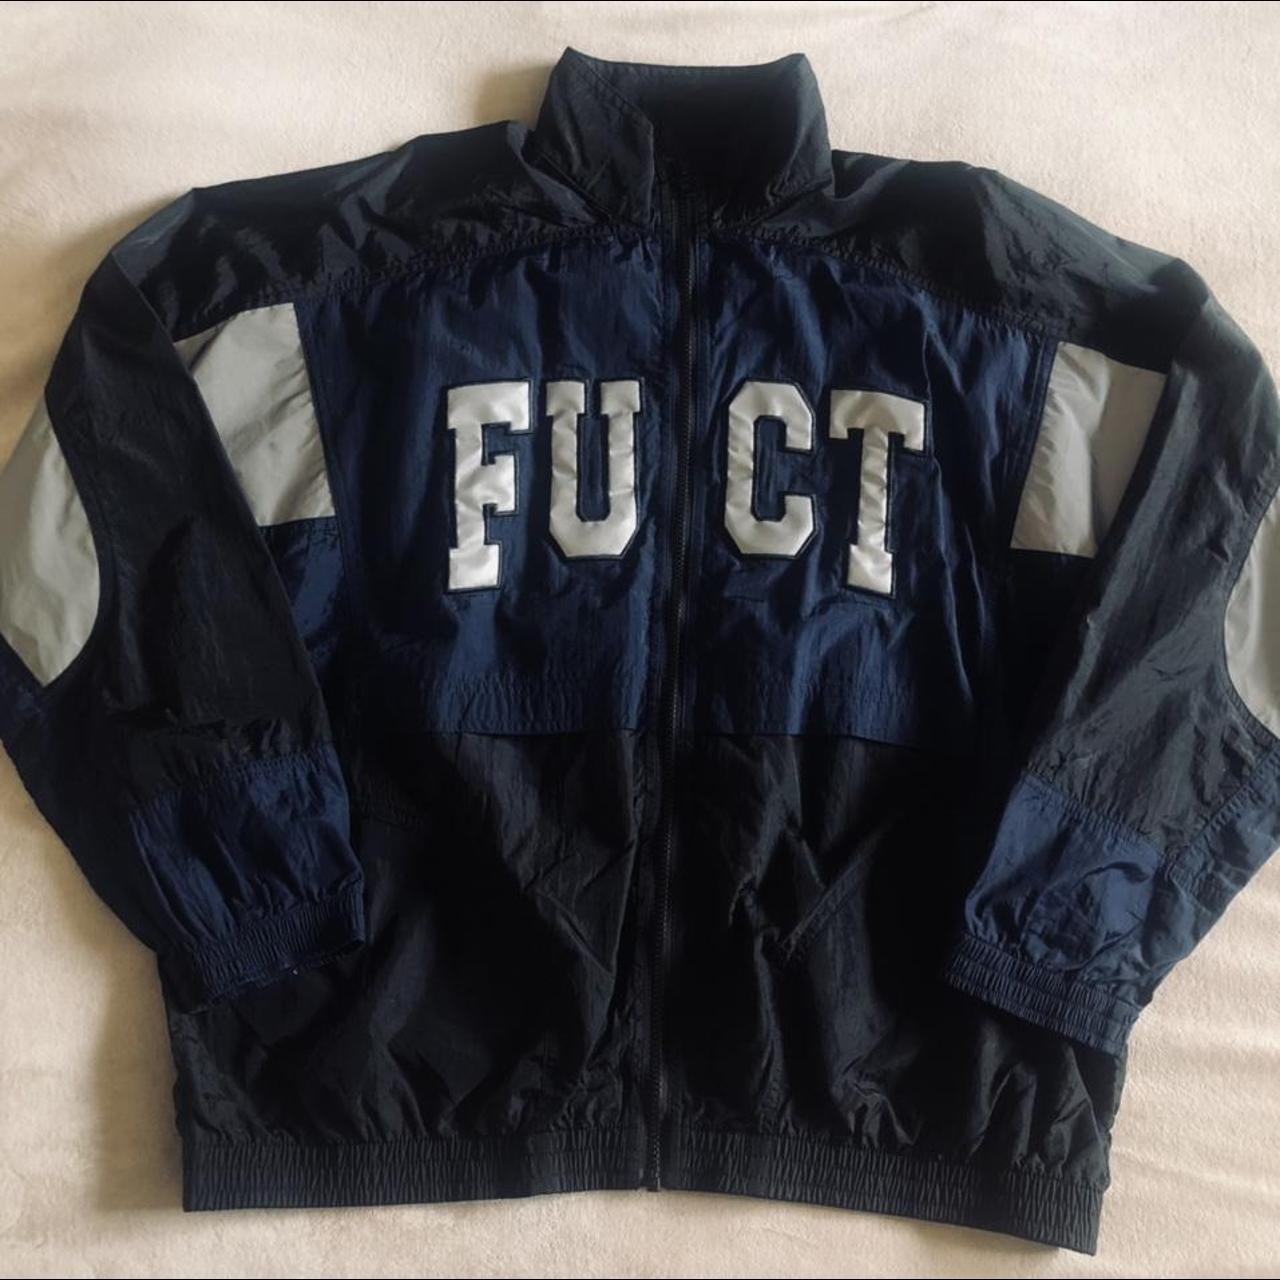 Product Image 1 - Fuct/SSDD Reflective Collegiate Track Jacket

Premium